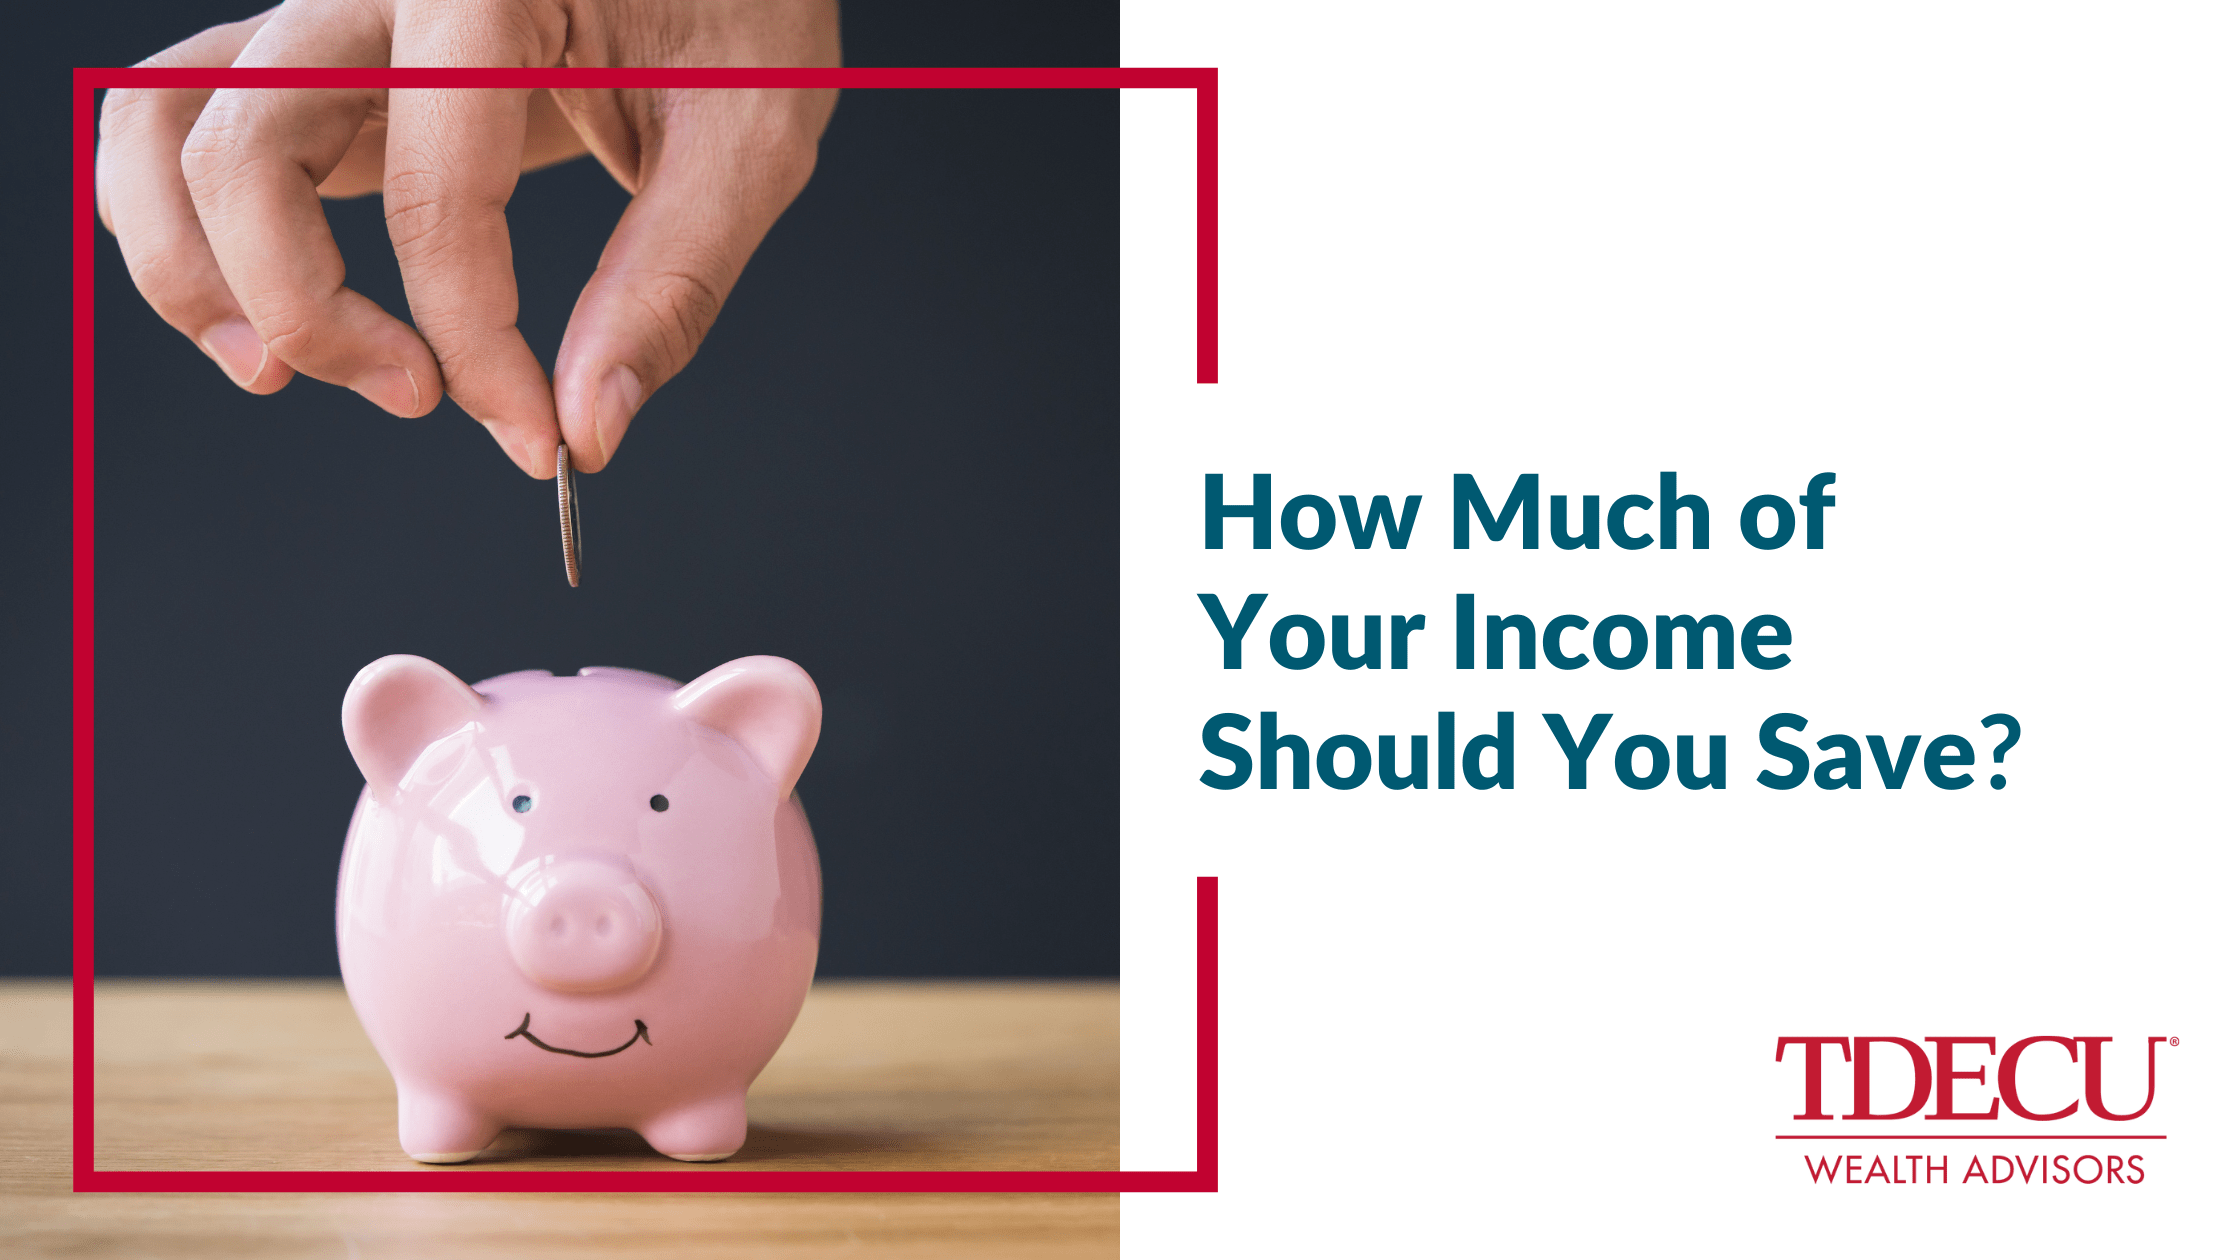 How Much of Your Income Should You Save?